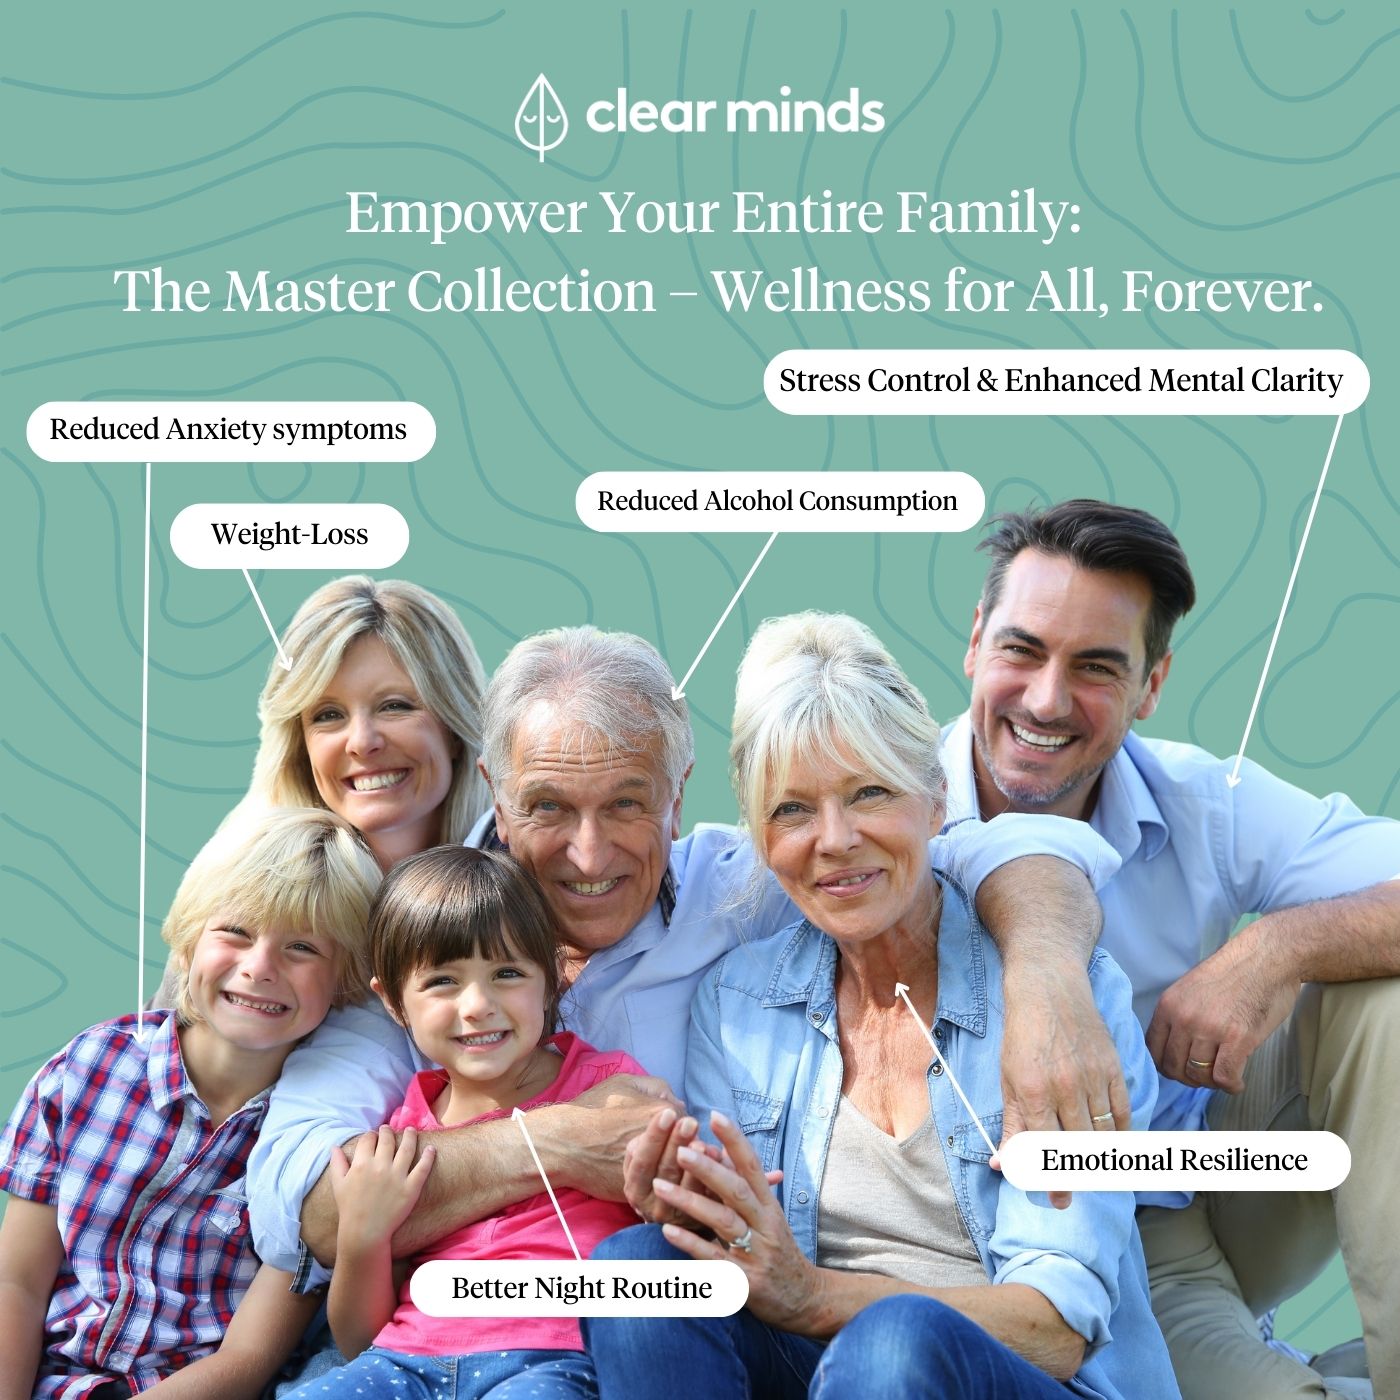 Master Collection Hypnotherapy - Lifetime All Access Family Package (200+ Sessions) - Clearmindshypnotherapy